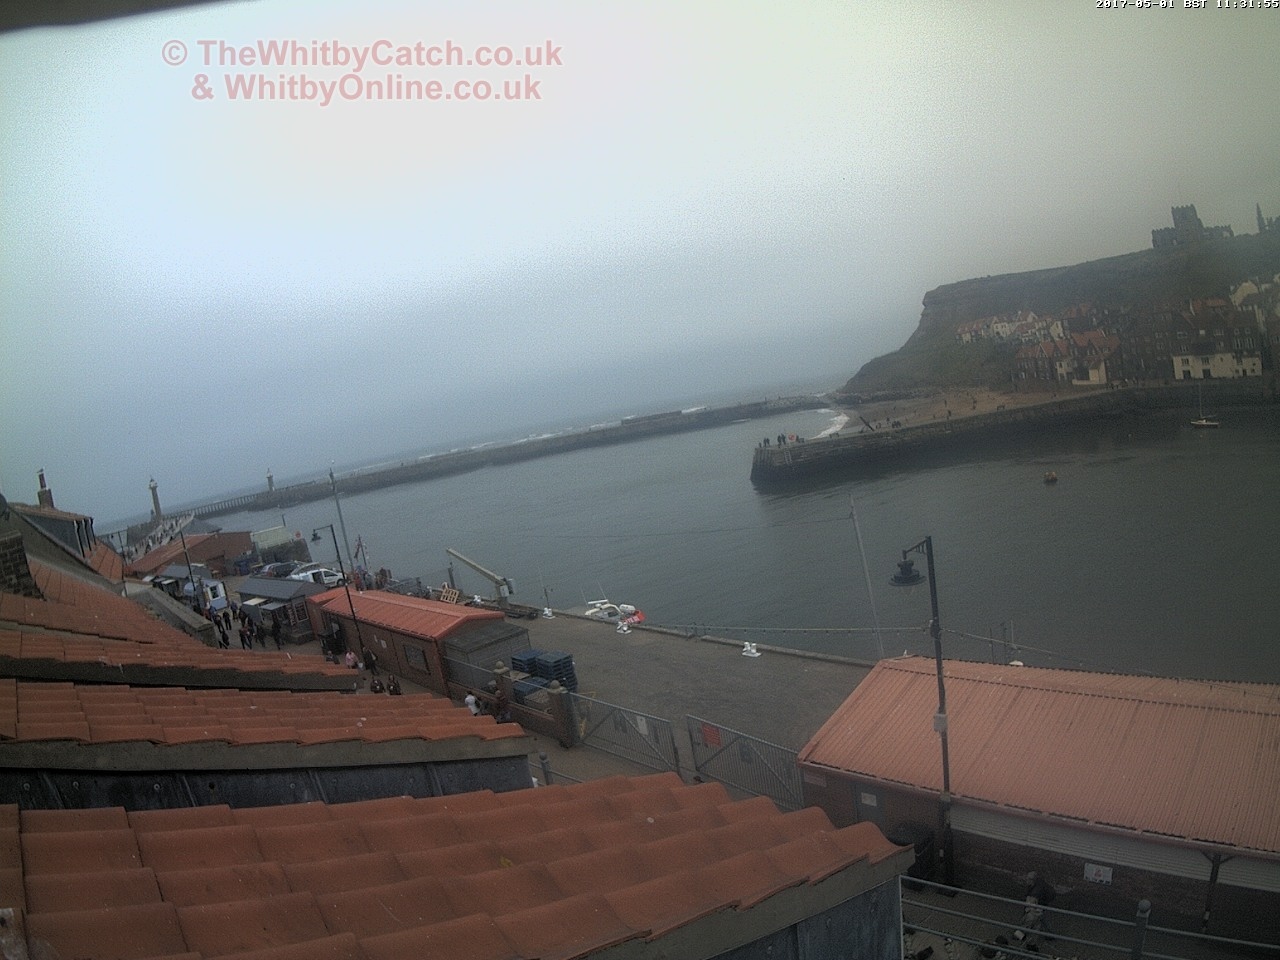 Whitby Mon 1st May 2017 11:32.